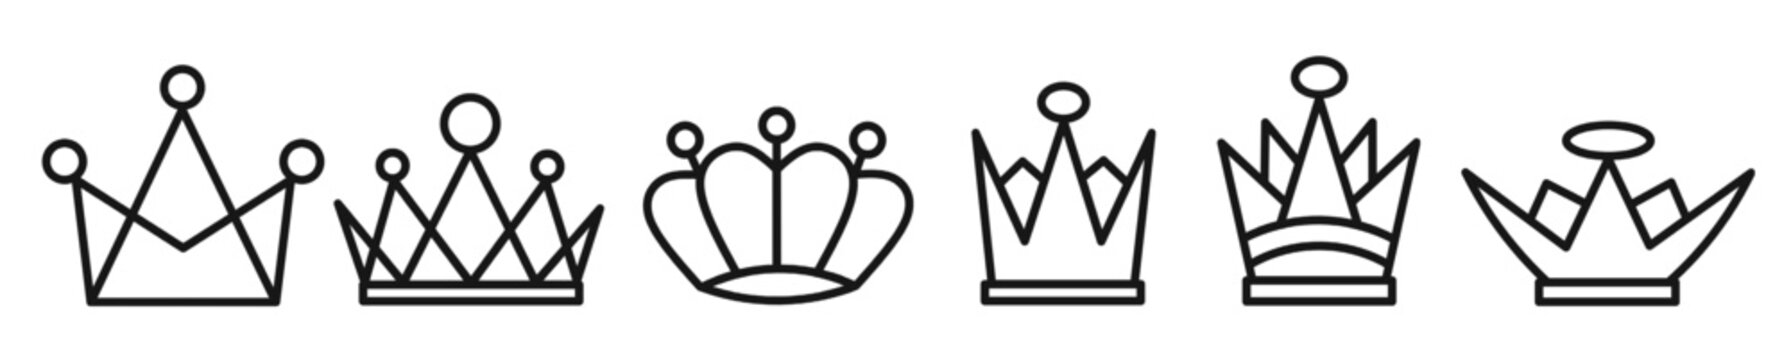 Crown icon template. Stock vector illustration.